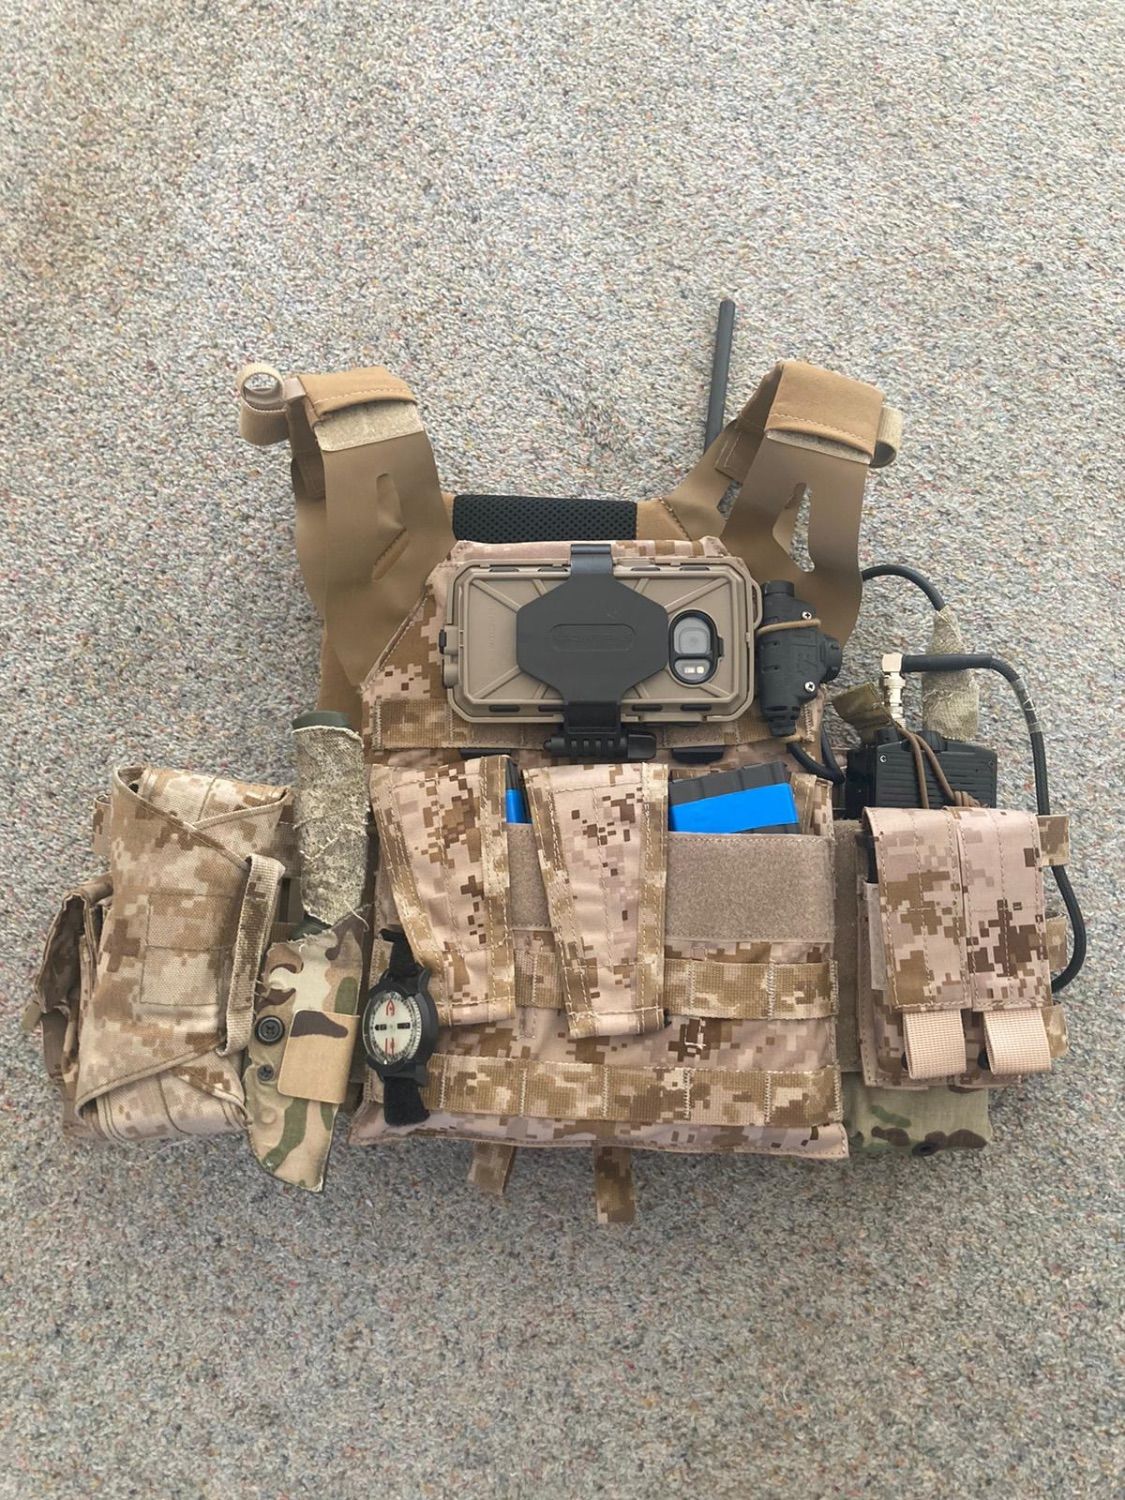 Crye, Shekkin gears, semapo and more - Gear - Airsoft Forums UK